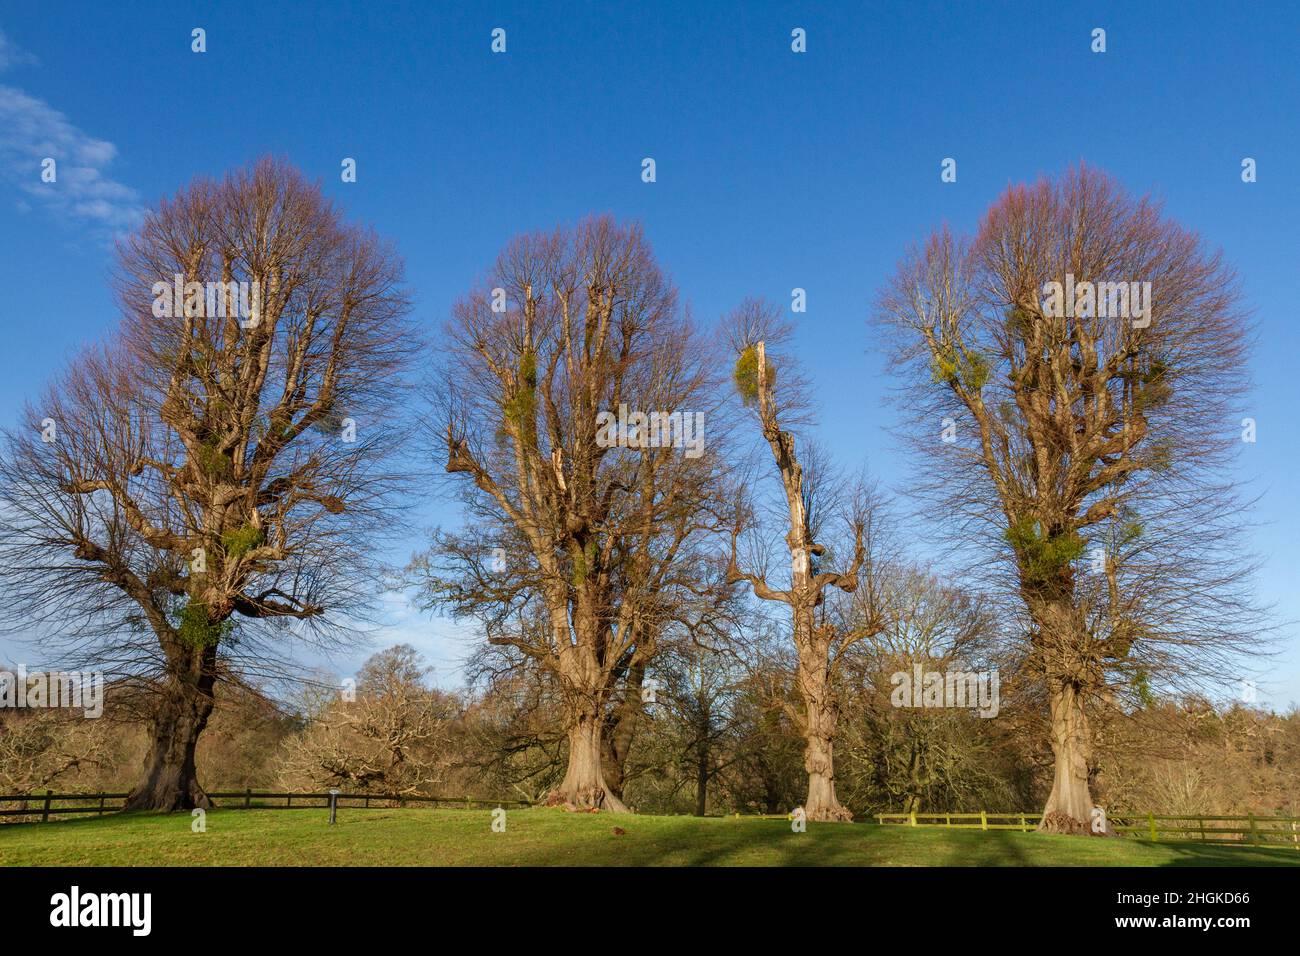 Lime trees (Tilia platyphyllos) during winter in Great Windsor Great Park, Surrey, UK. Stock Photo